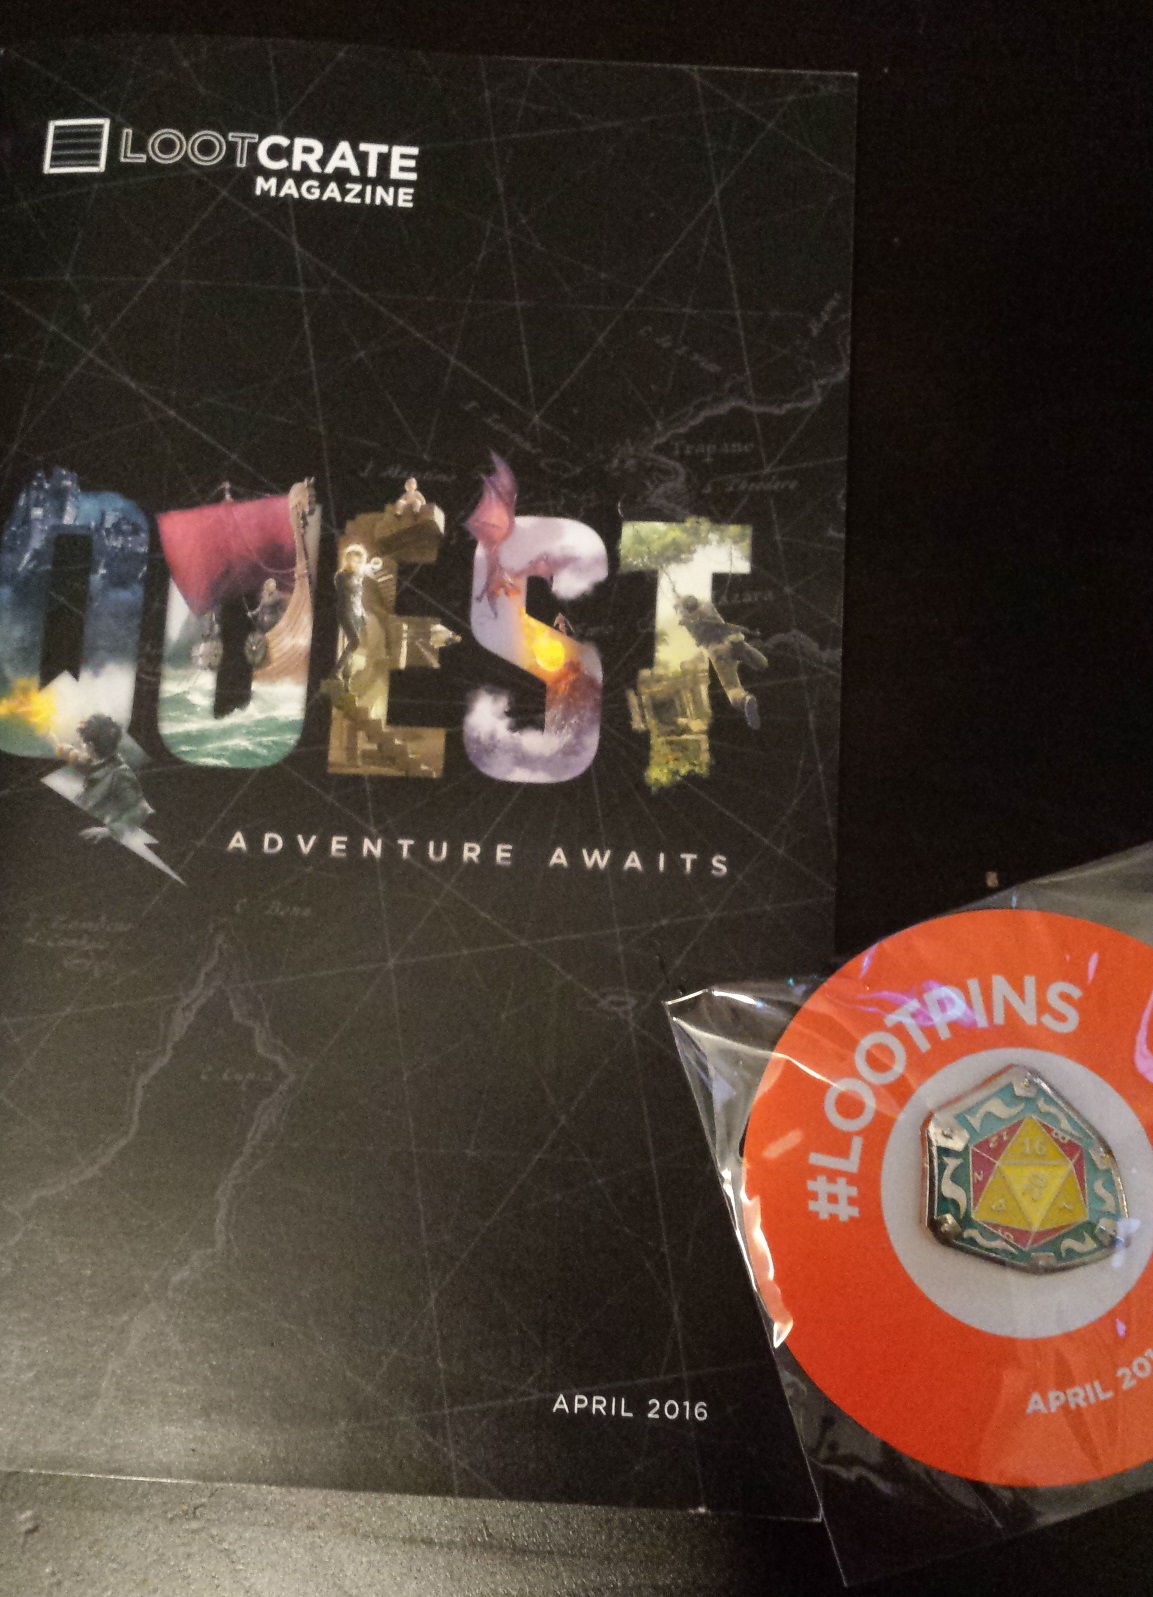 Loot crate magazine and pin, april loot crate, d&d, loot crate unboxing, april's loot crate 2016, quest